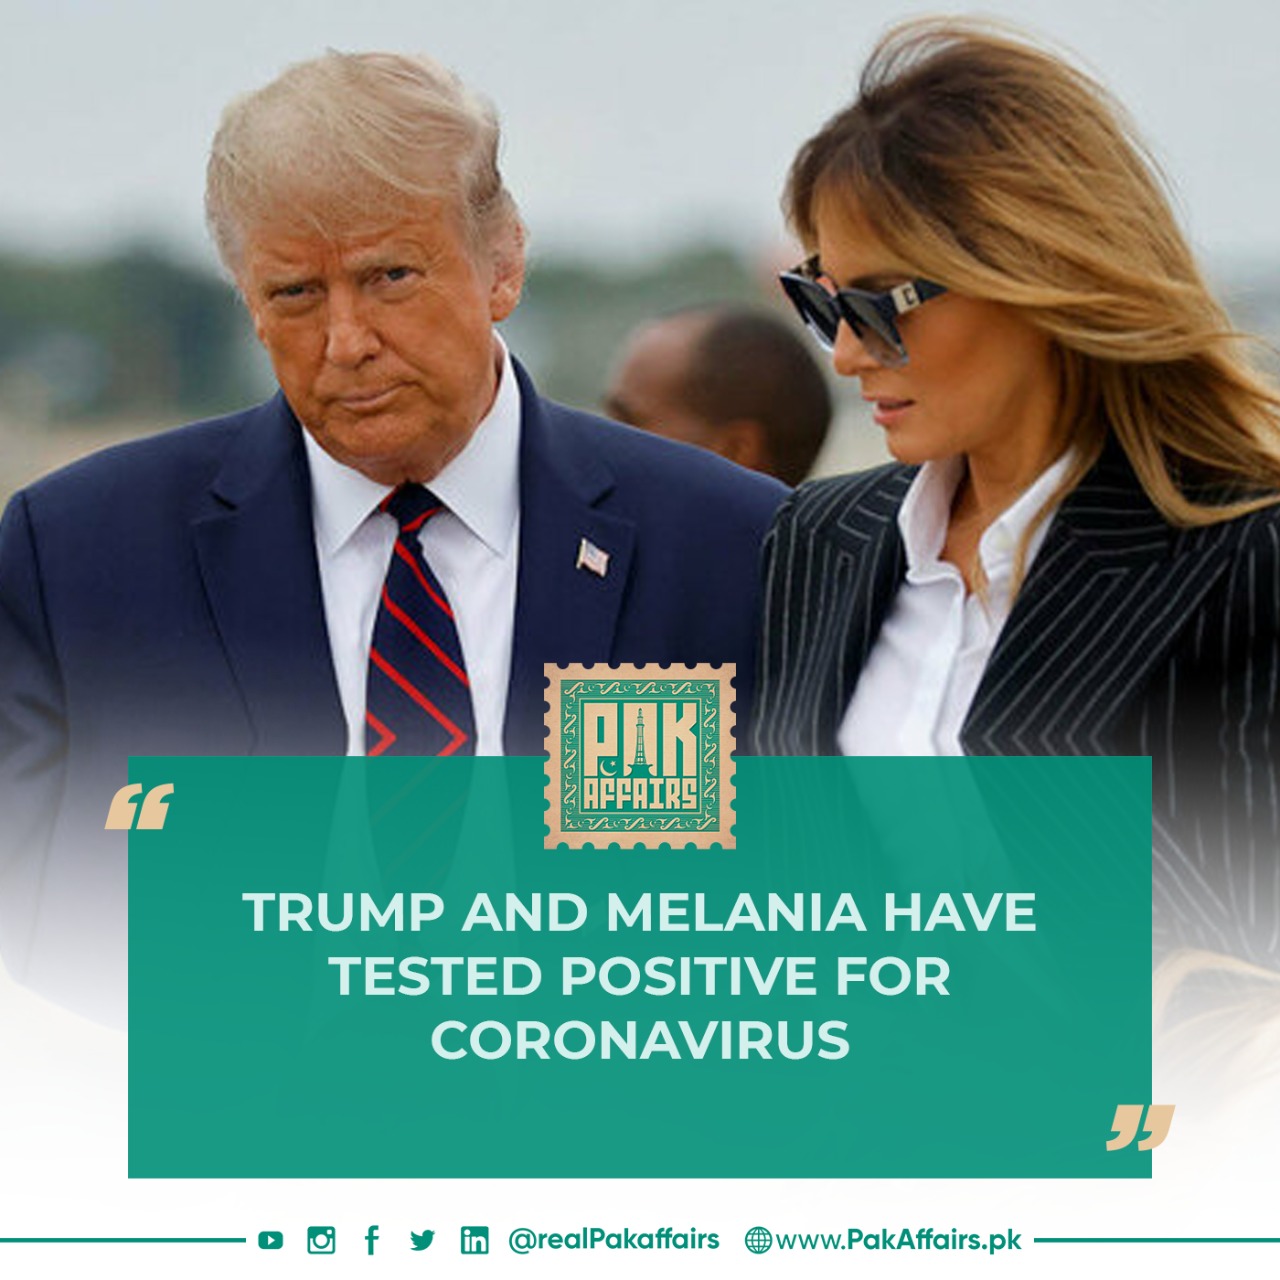 The US president and his wife have contracted the coronavirus